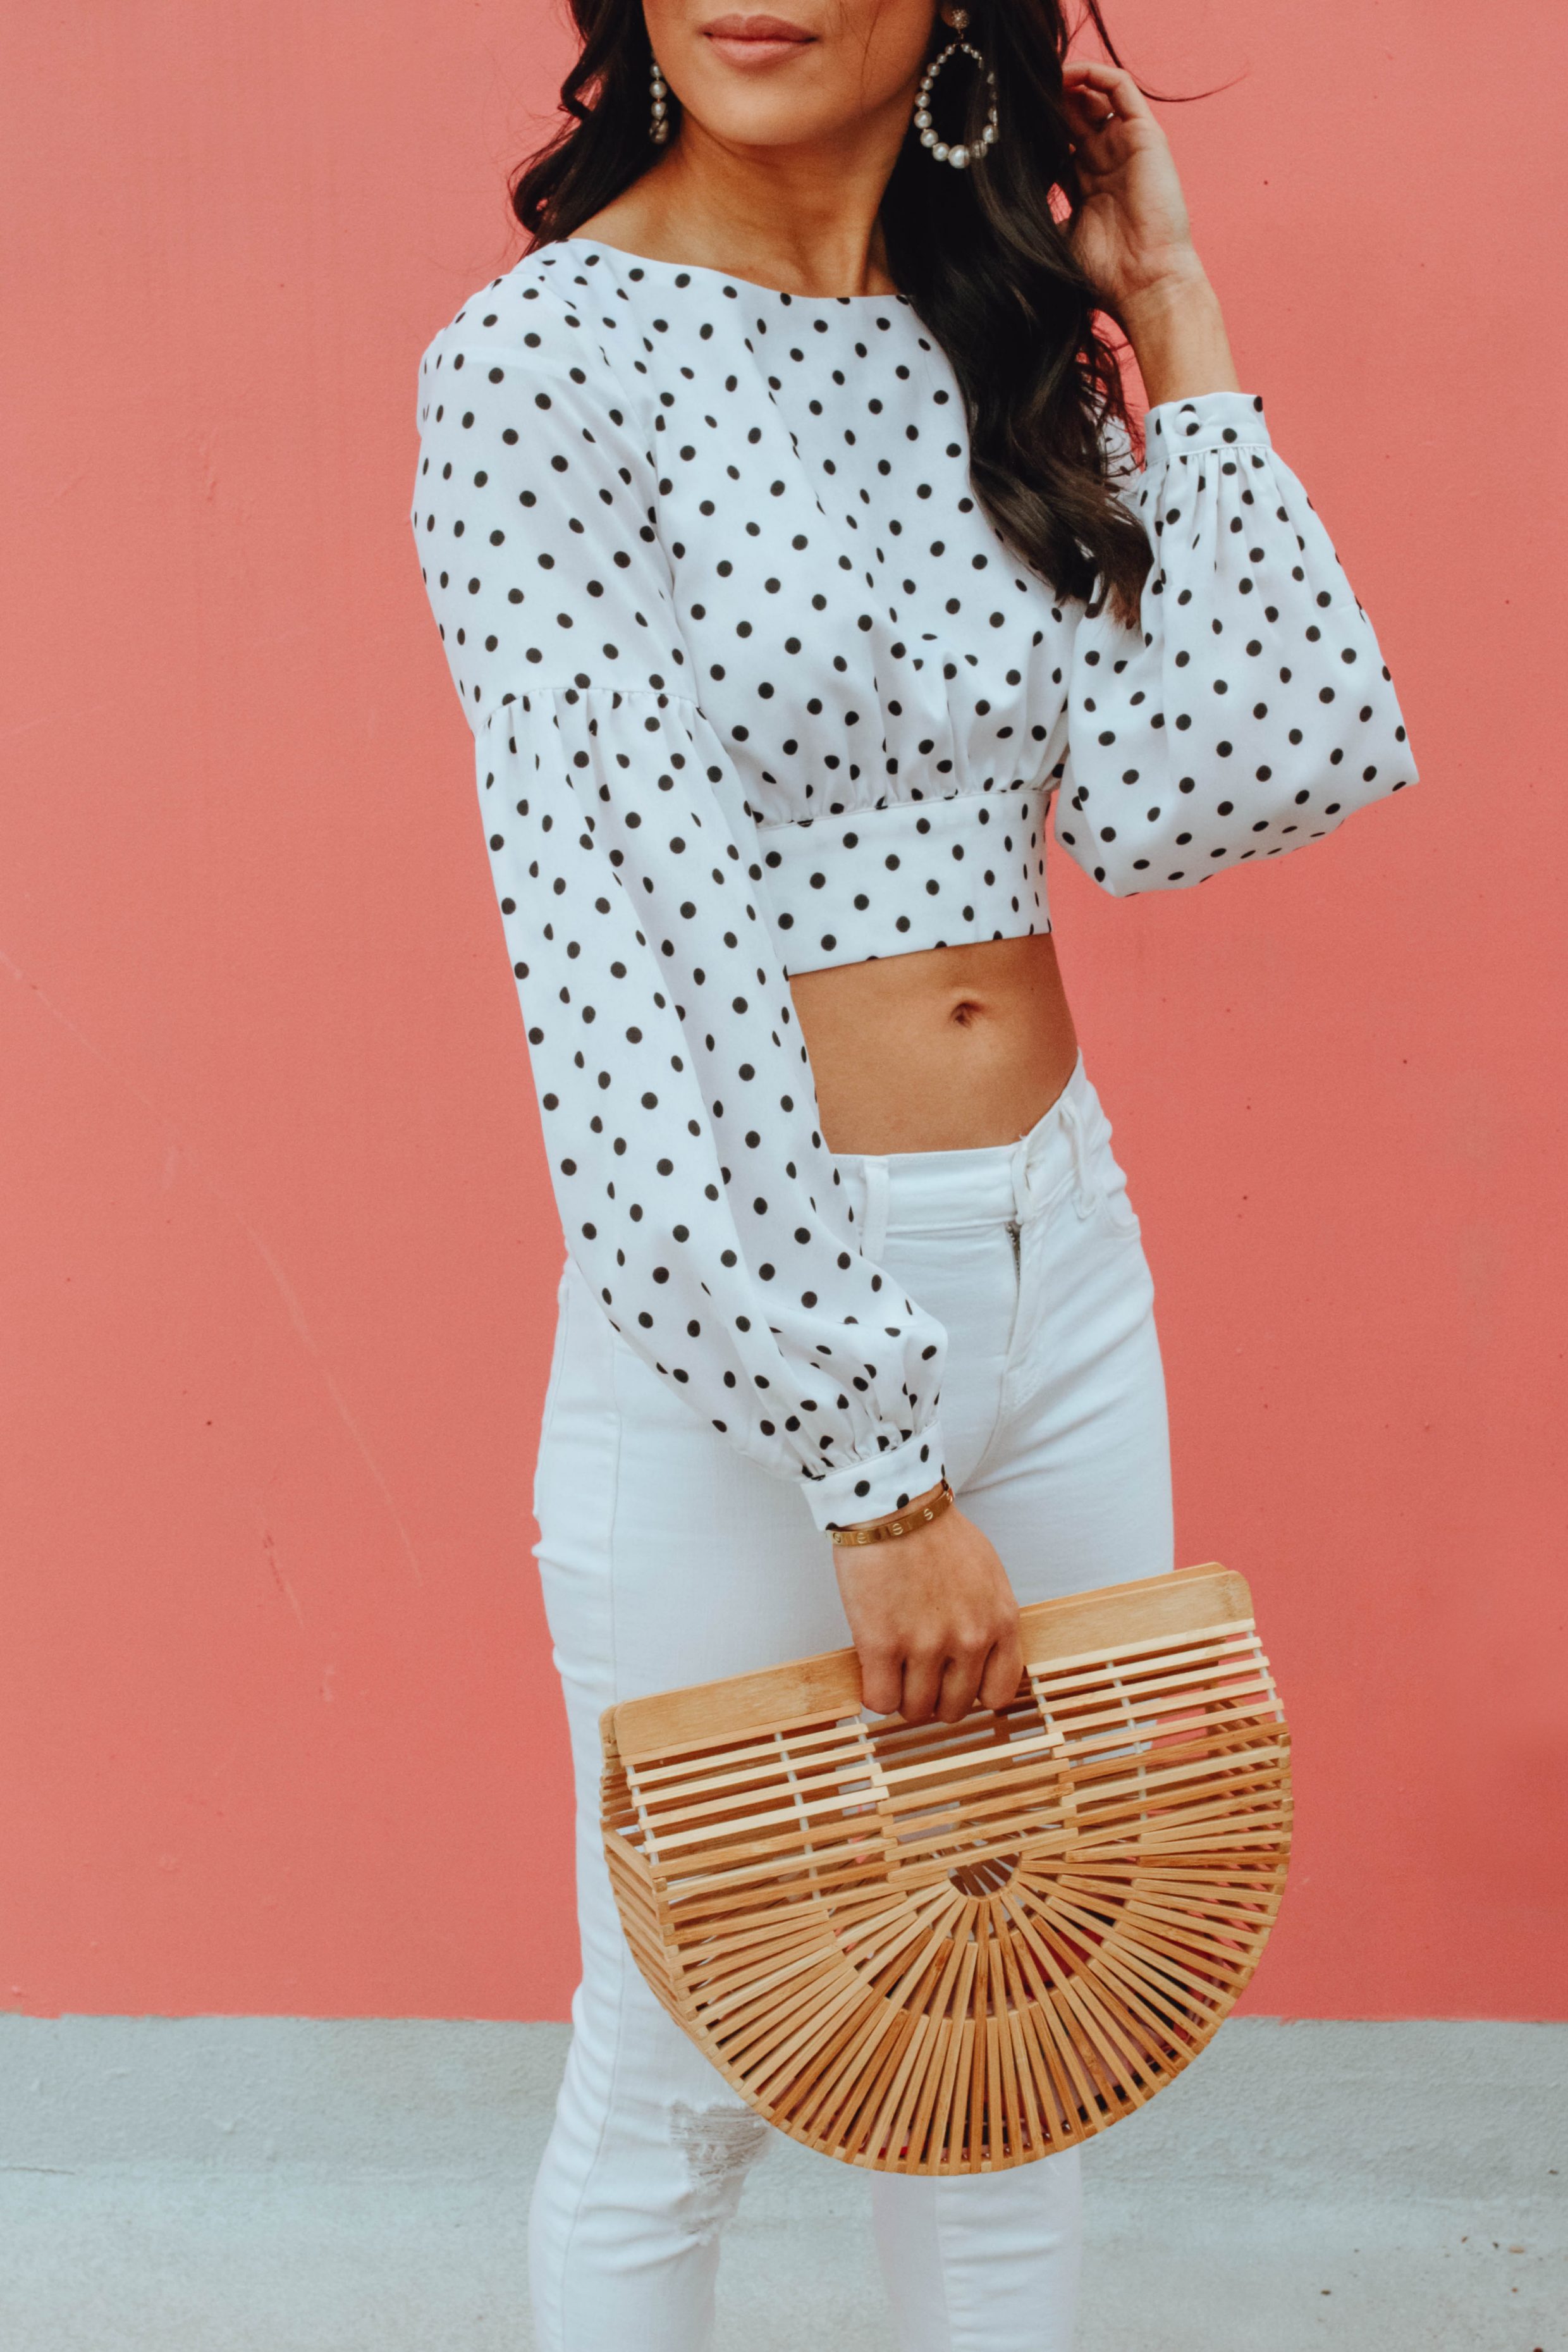 Hoang-Kim wears a polka dot crop top with white jeans and Cult Gaia bamboo bag